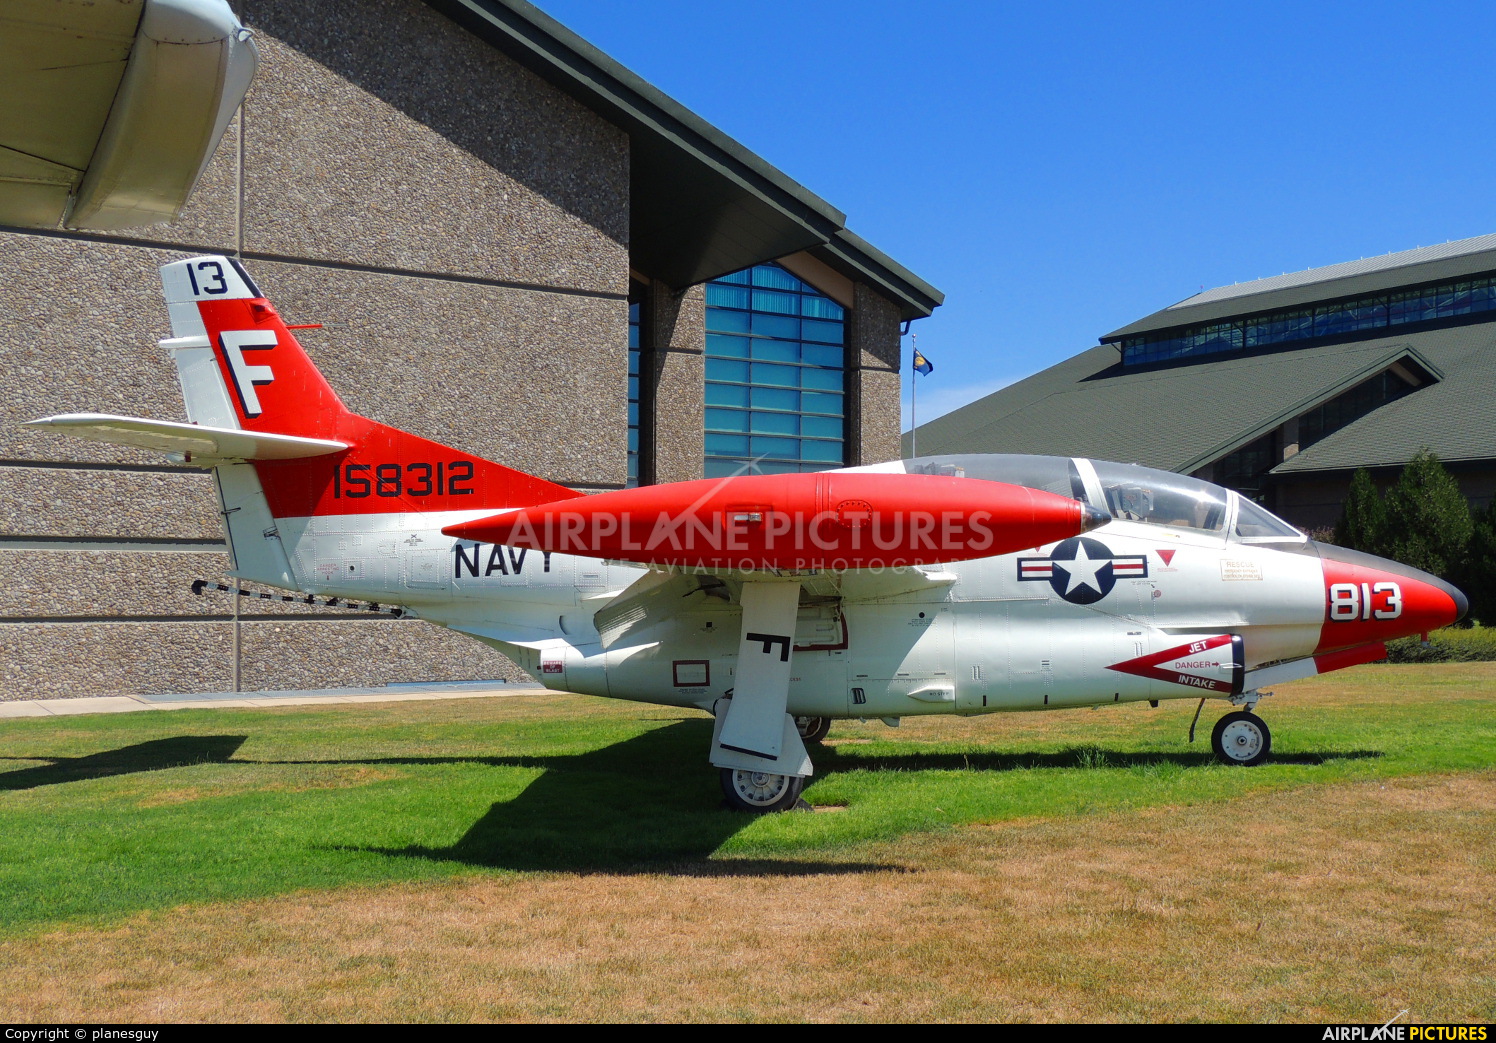 USA - Navy 158312 aircraft at McMinnville - Evergreen Aviation &amp; Space Museum